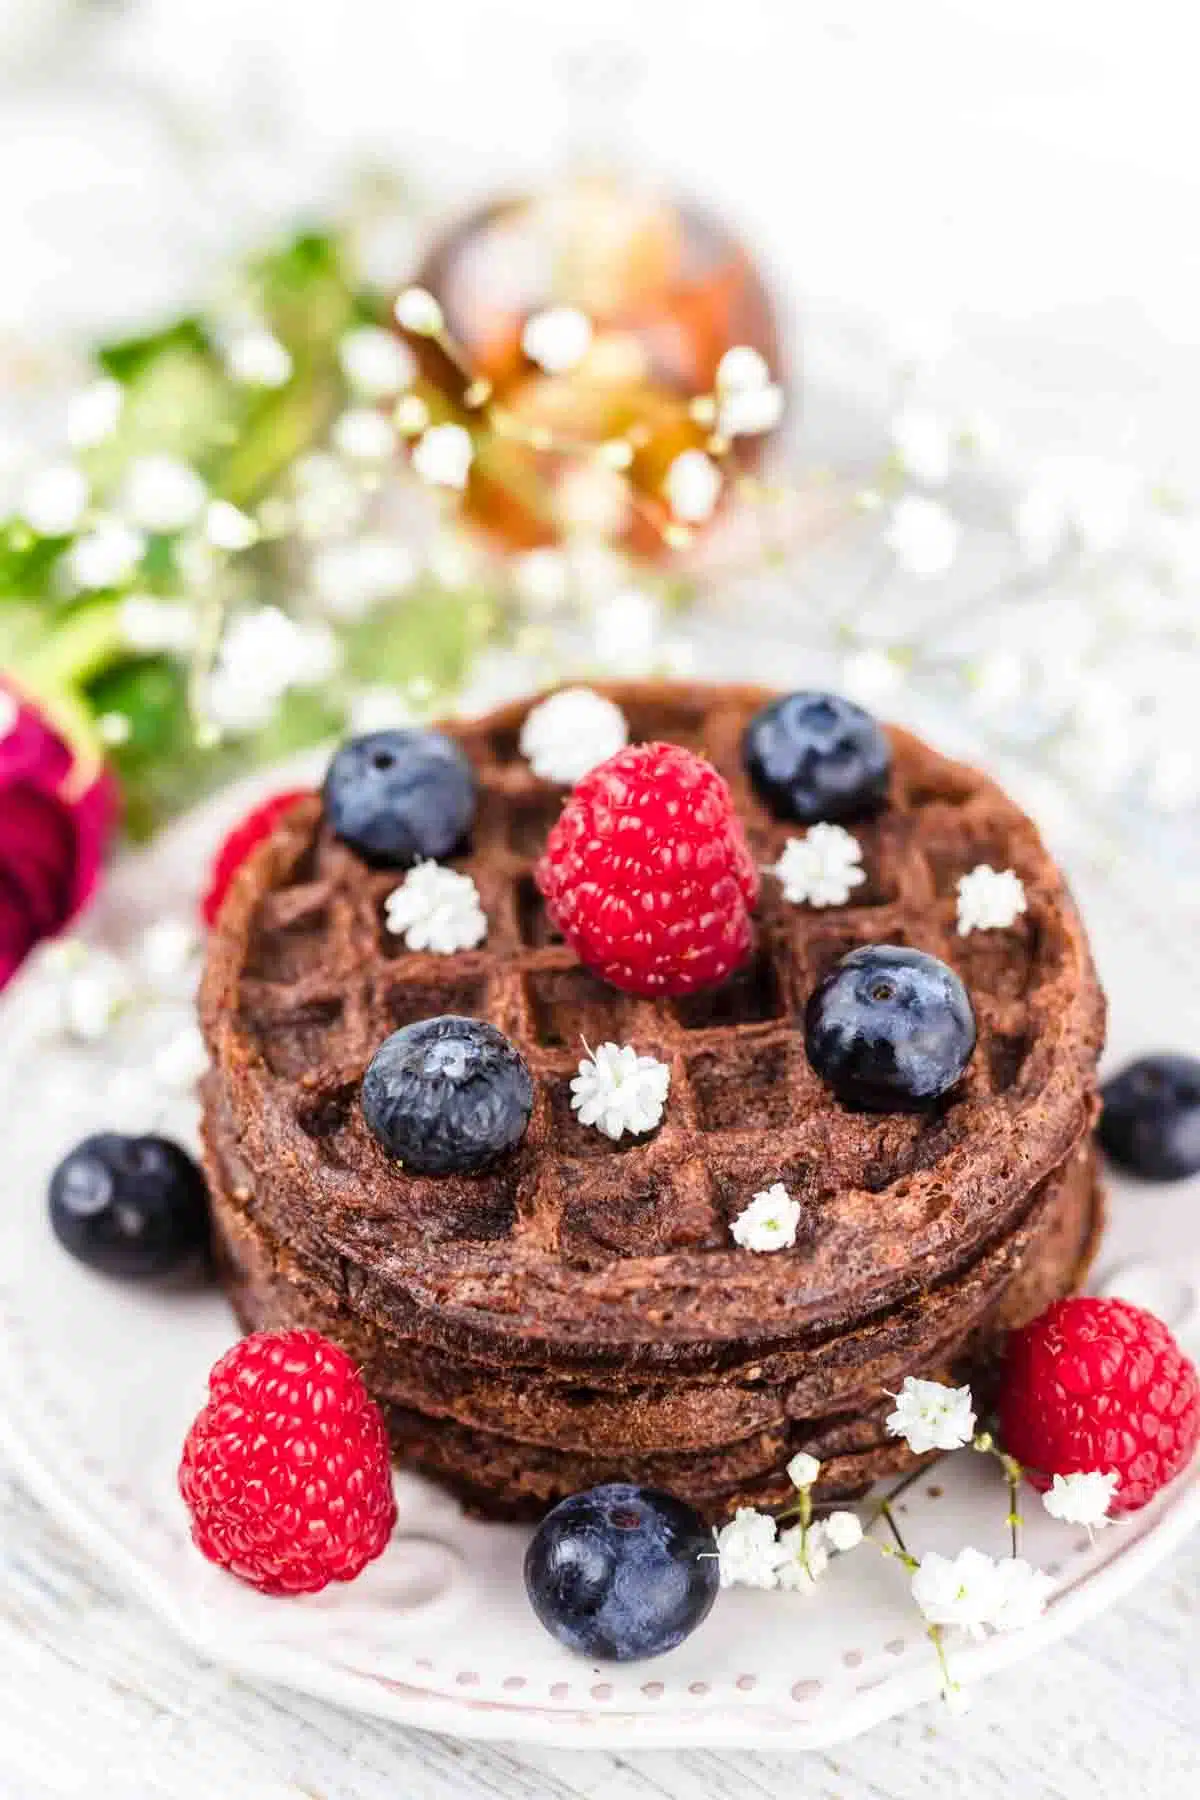 Best Chocolate Chaffle with raspberries and blueberries